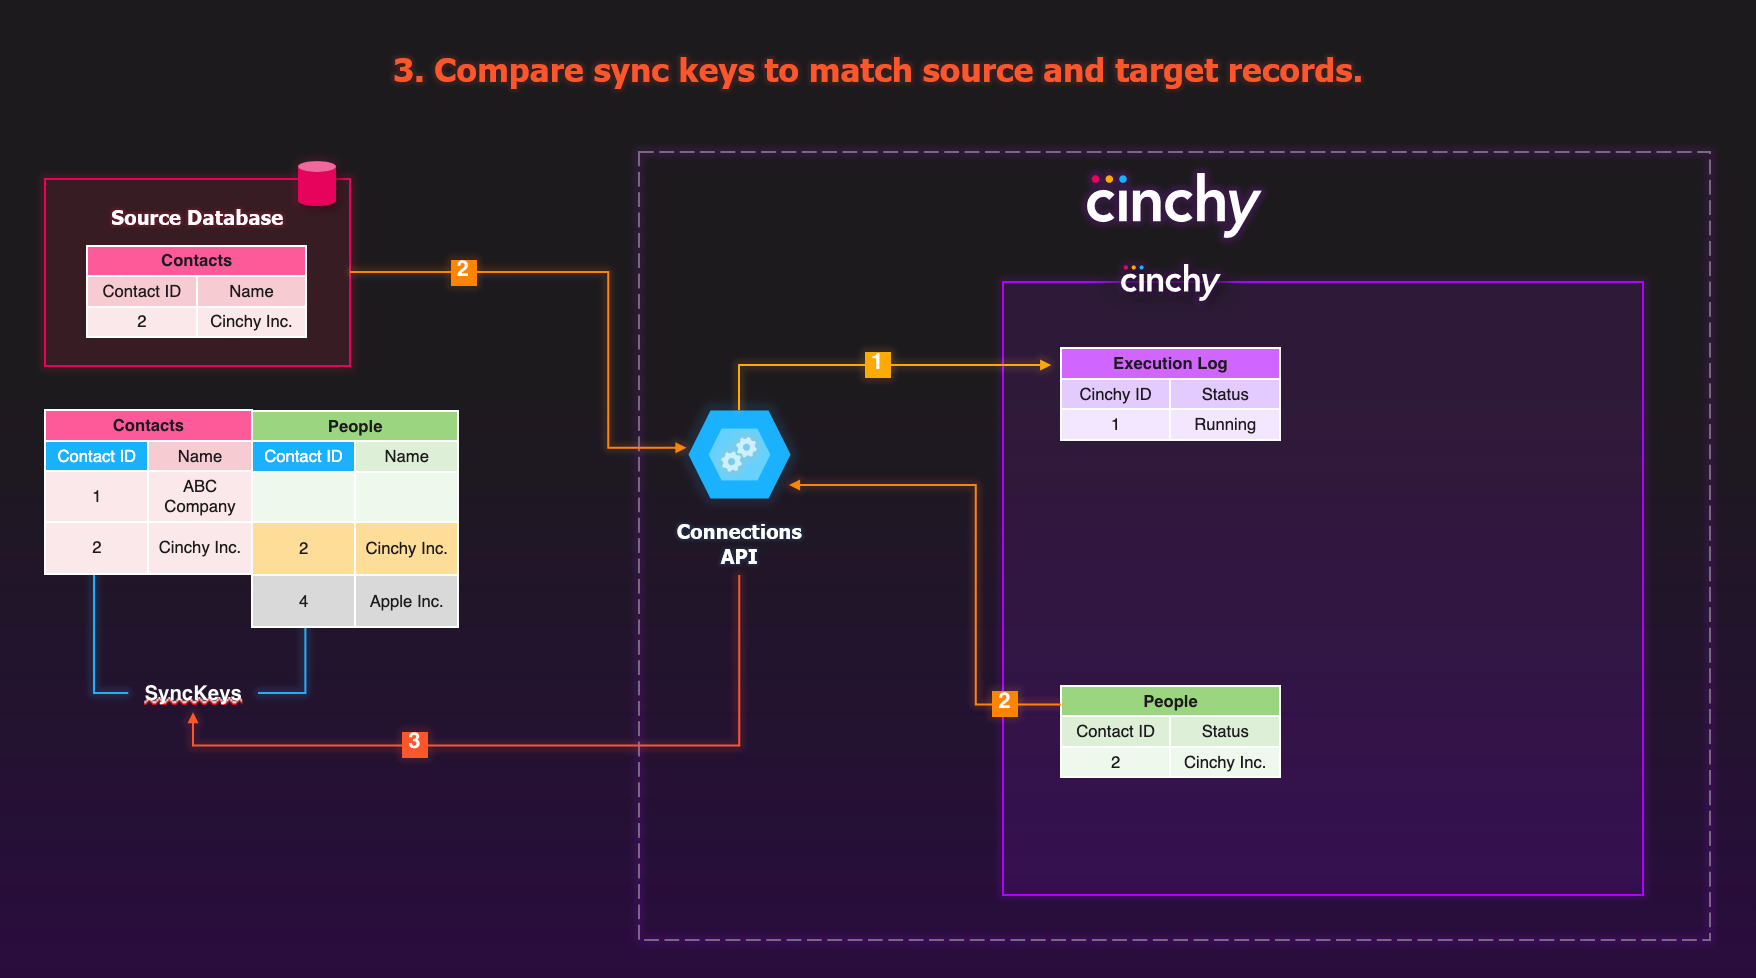 It compares the sync keys to match up source and target records